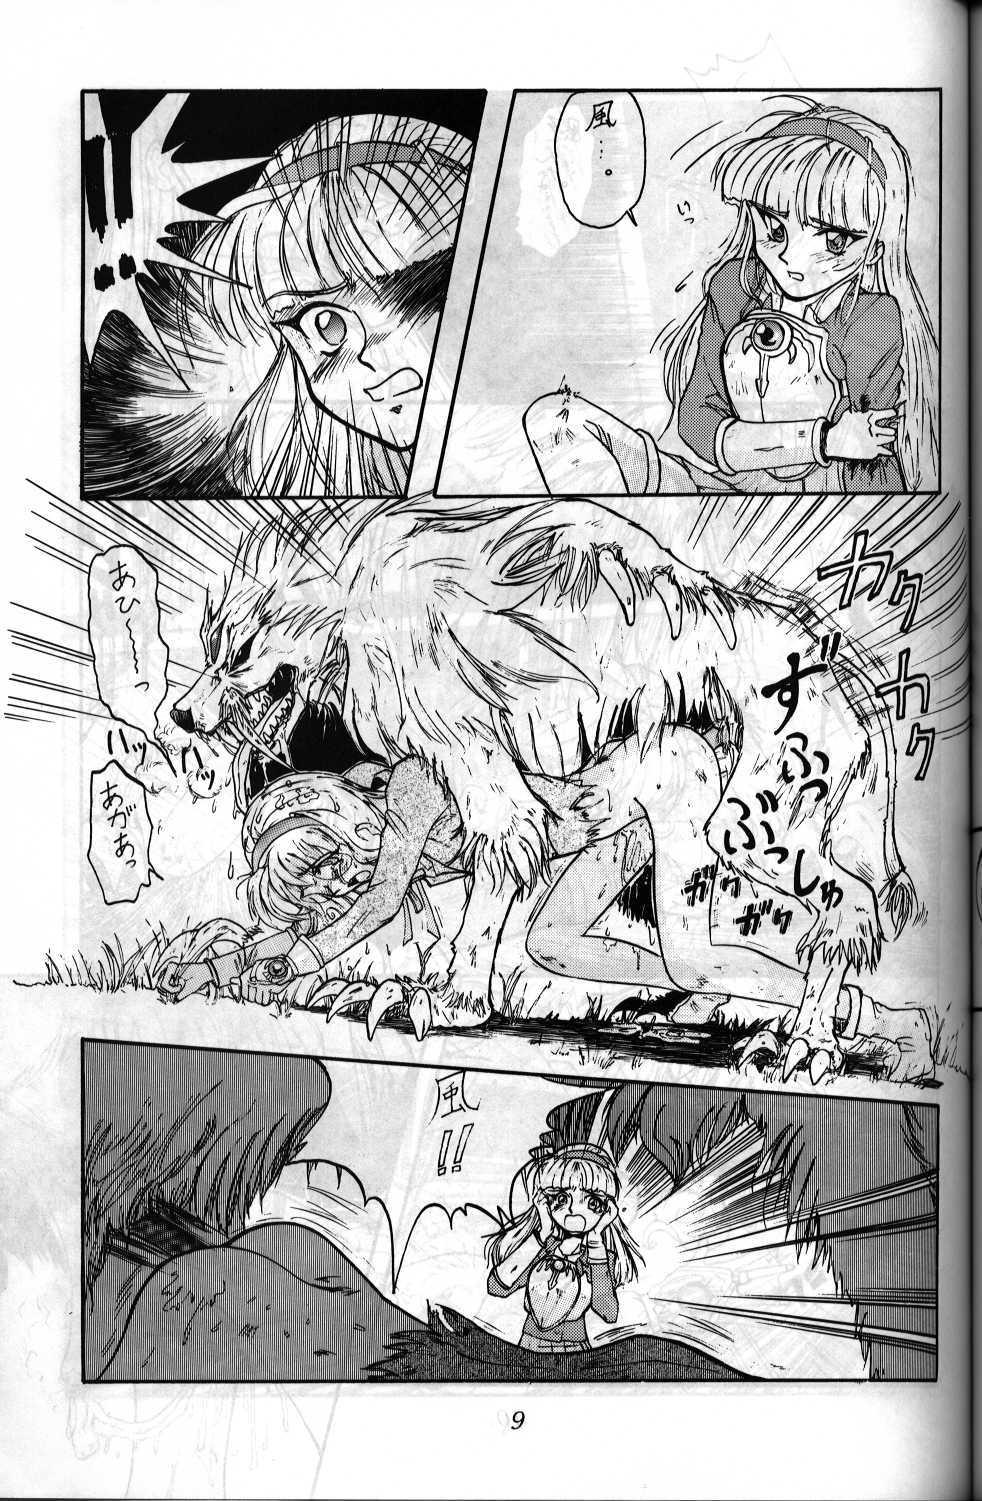 Alt new master - Magic knight rayearth Jerking Off - Page 5